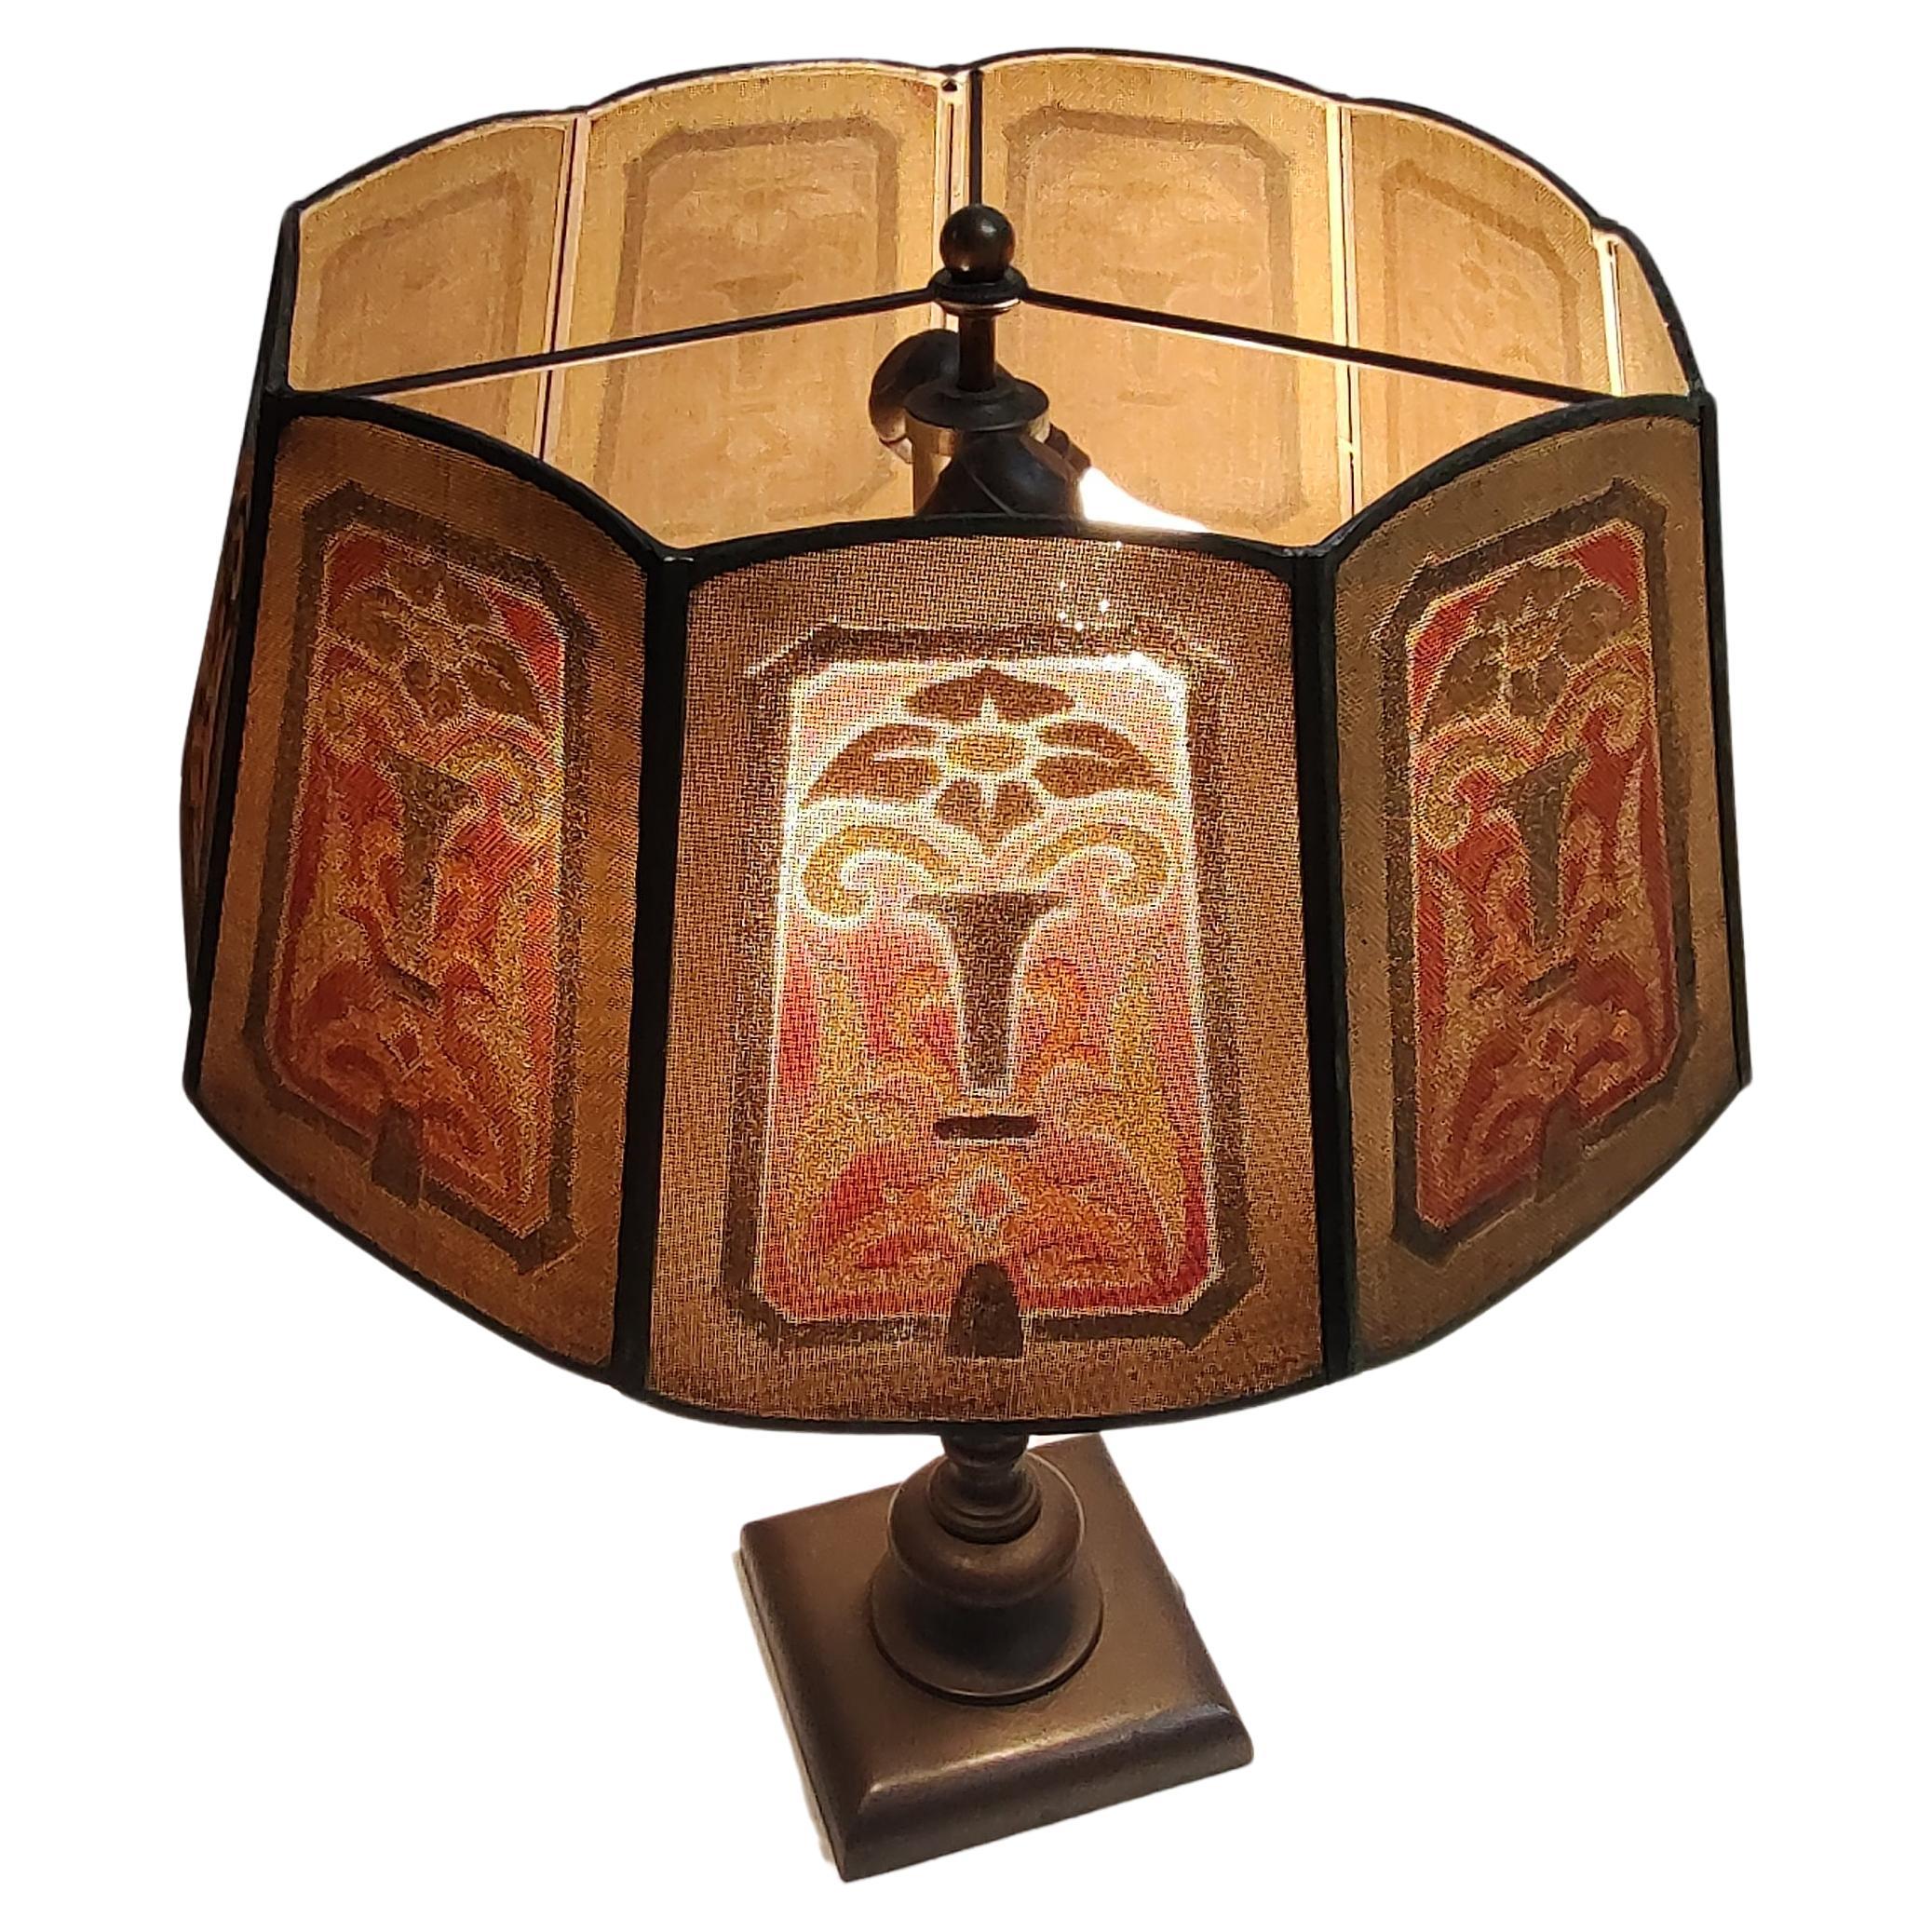 Fabulous Art Deco metal mesh lamp shade be with a geometric pattern. Possibly a Tiffany shade as they made this style of shade.  Bronze candle stick base with a double cluster socket. Some oxidation on lamp base on one side, see pic. In excellent